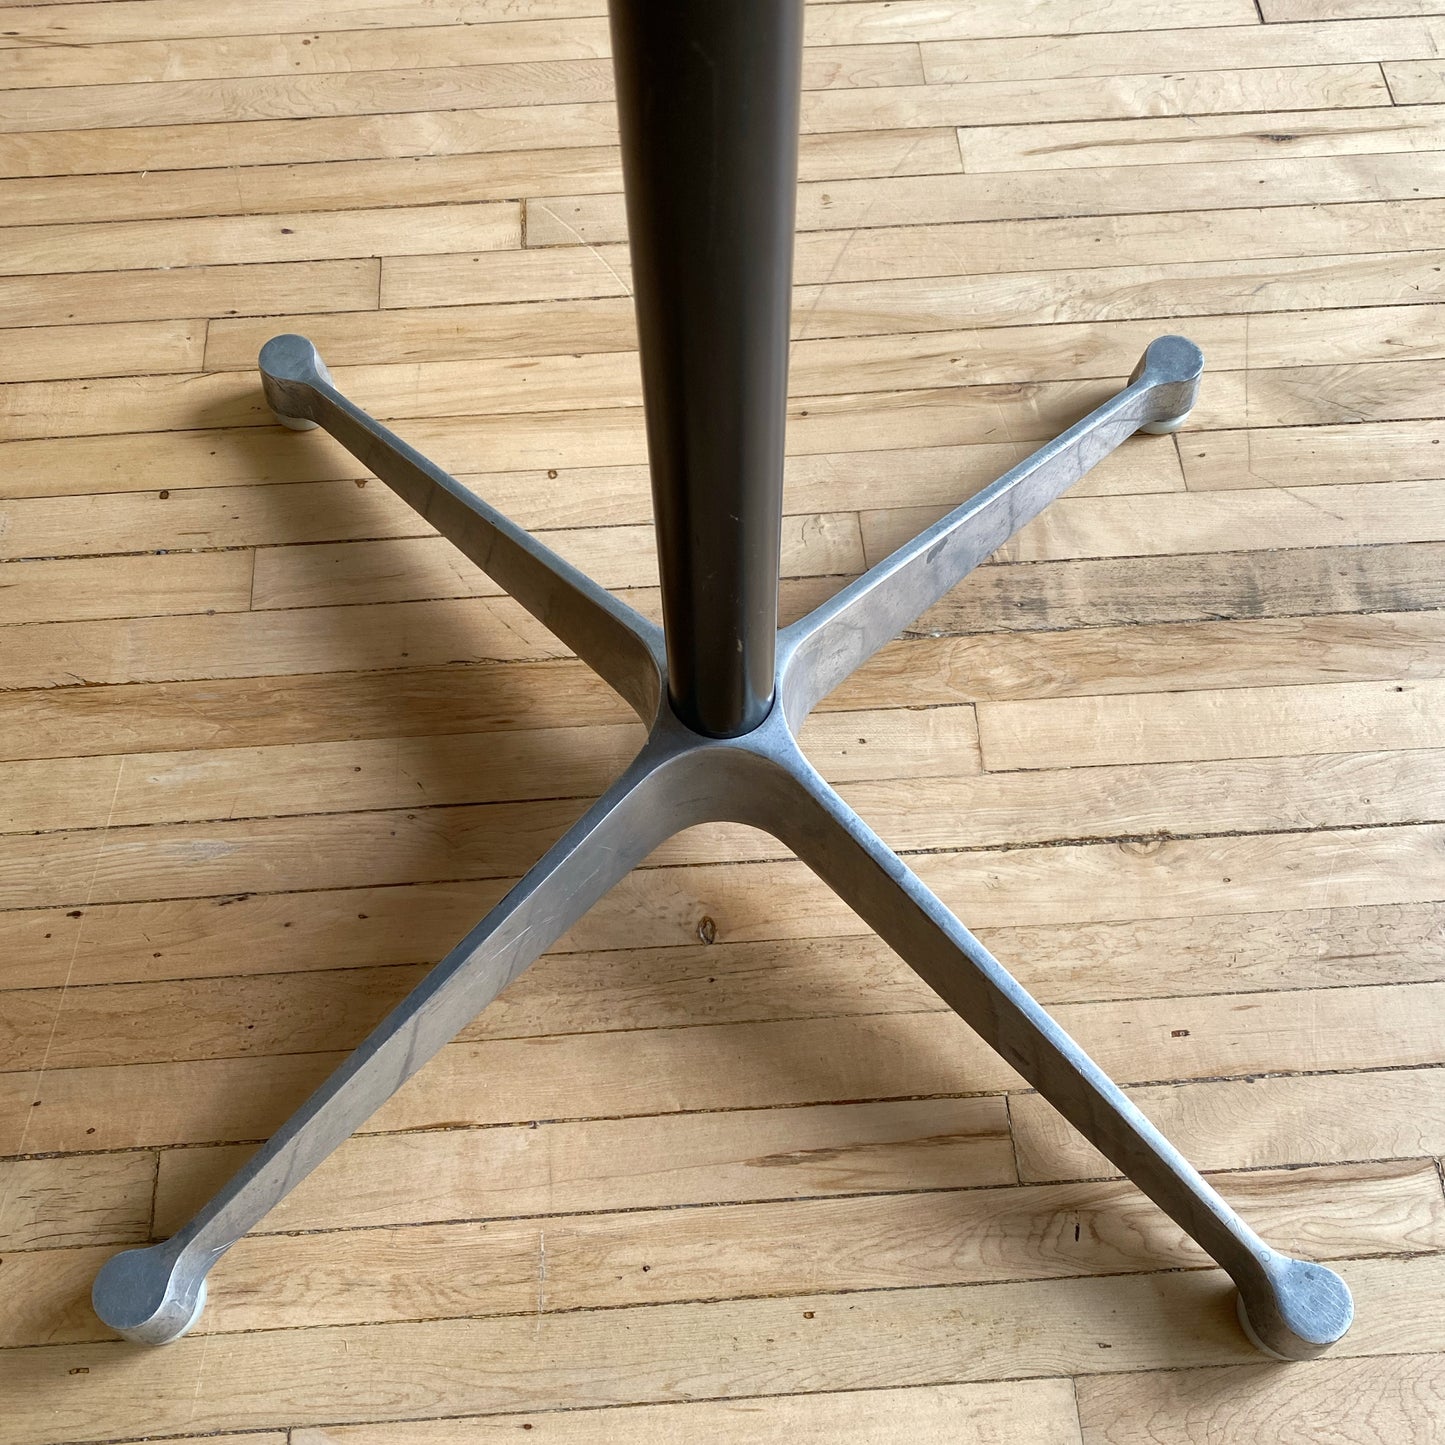 1960's Eames for Herman Miller Round Dining Table